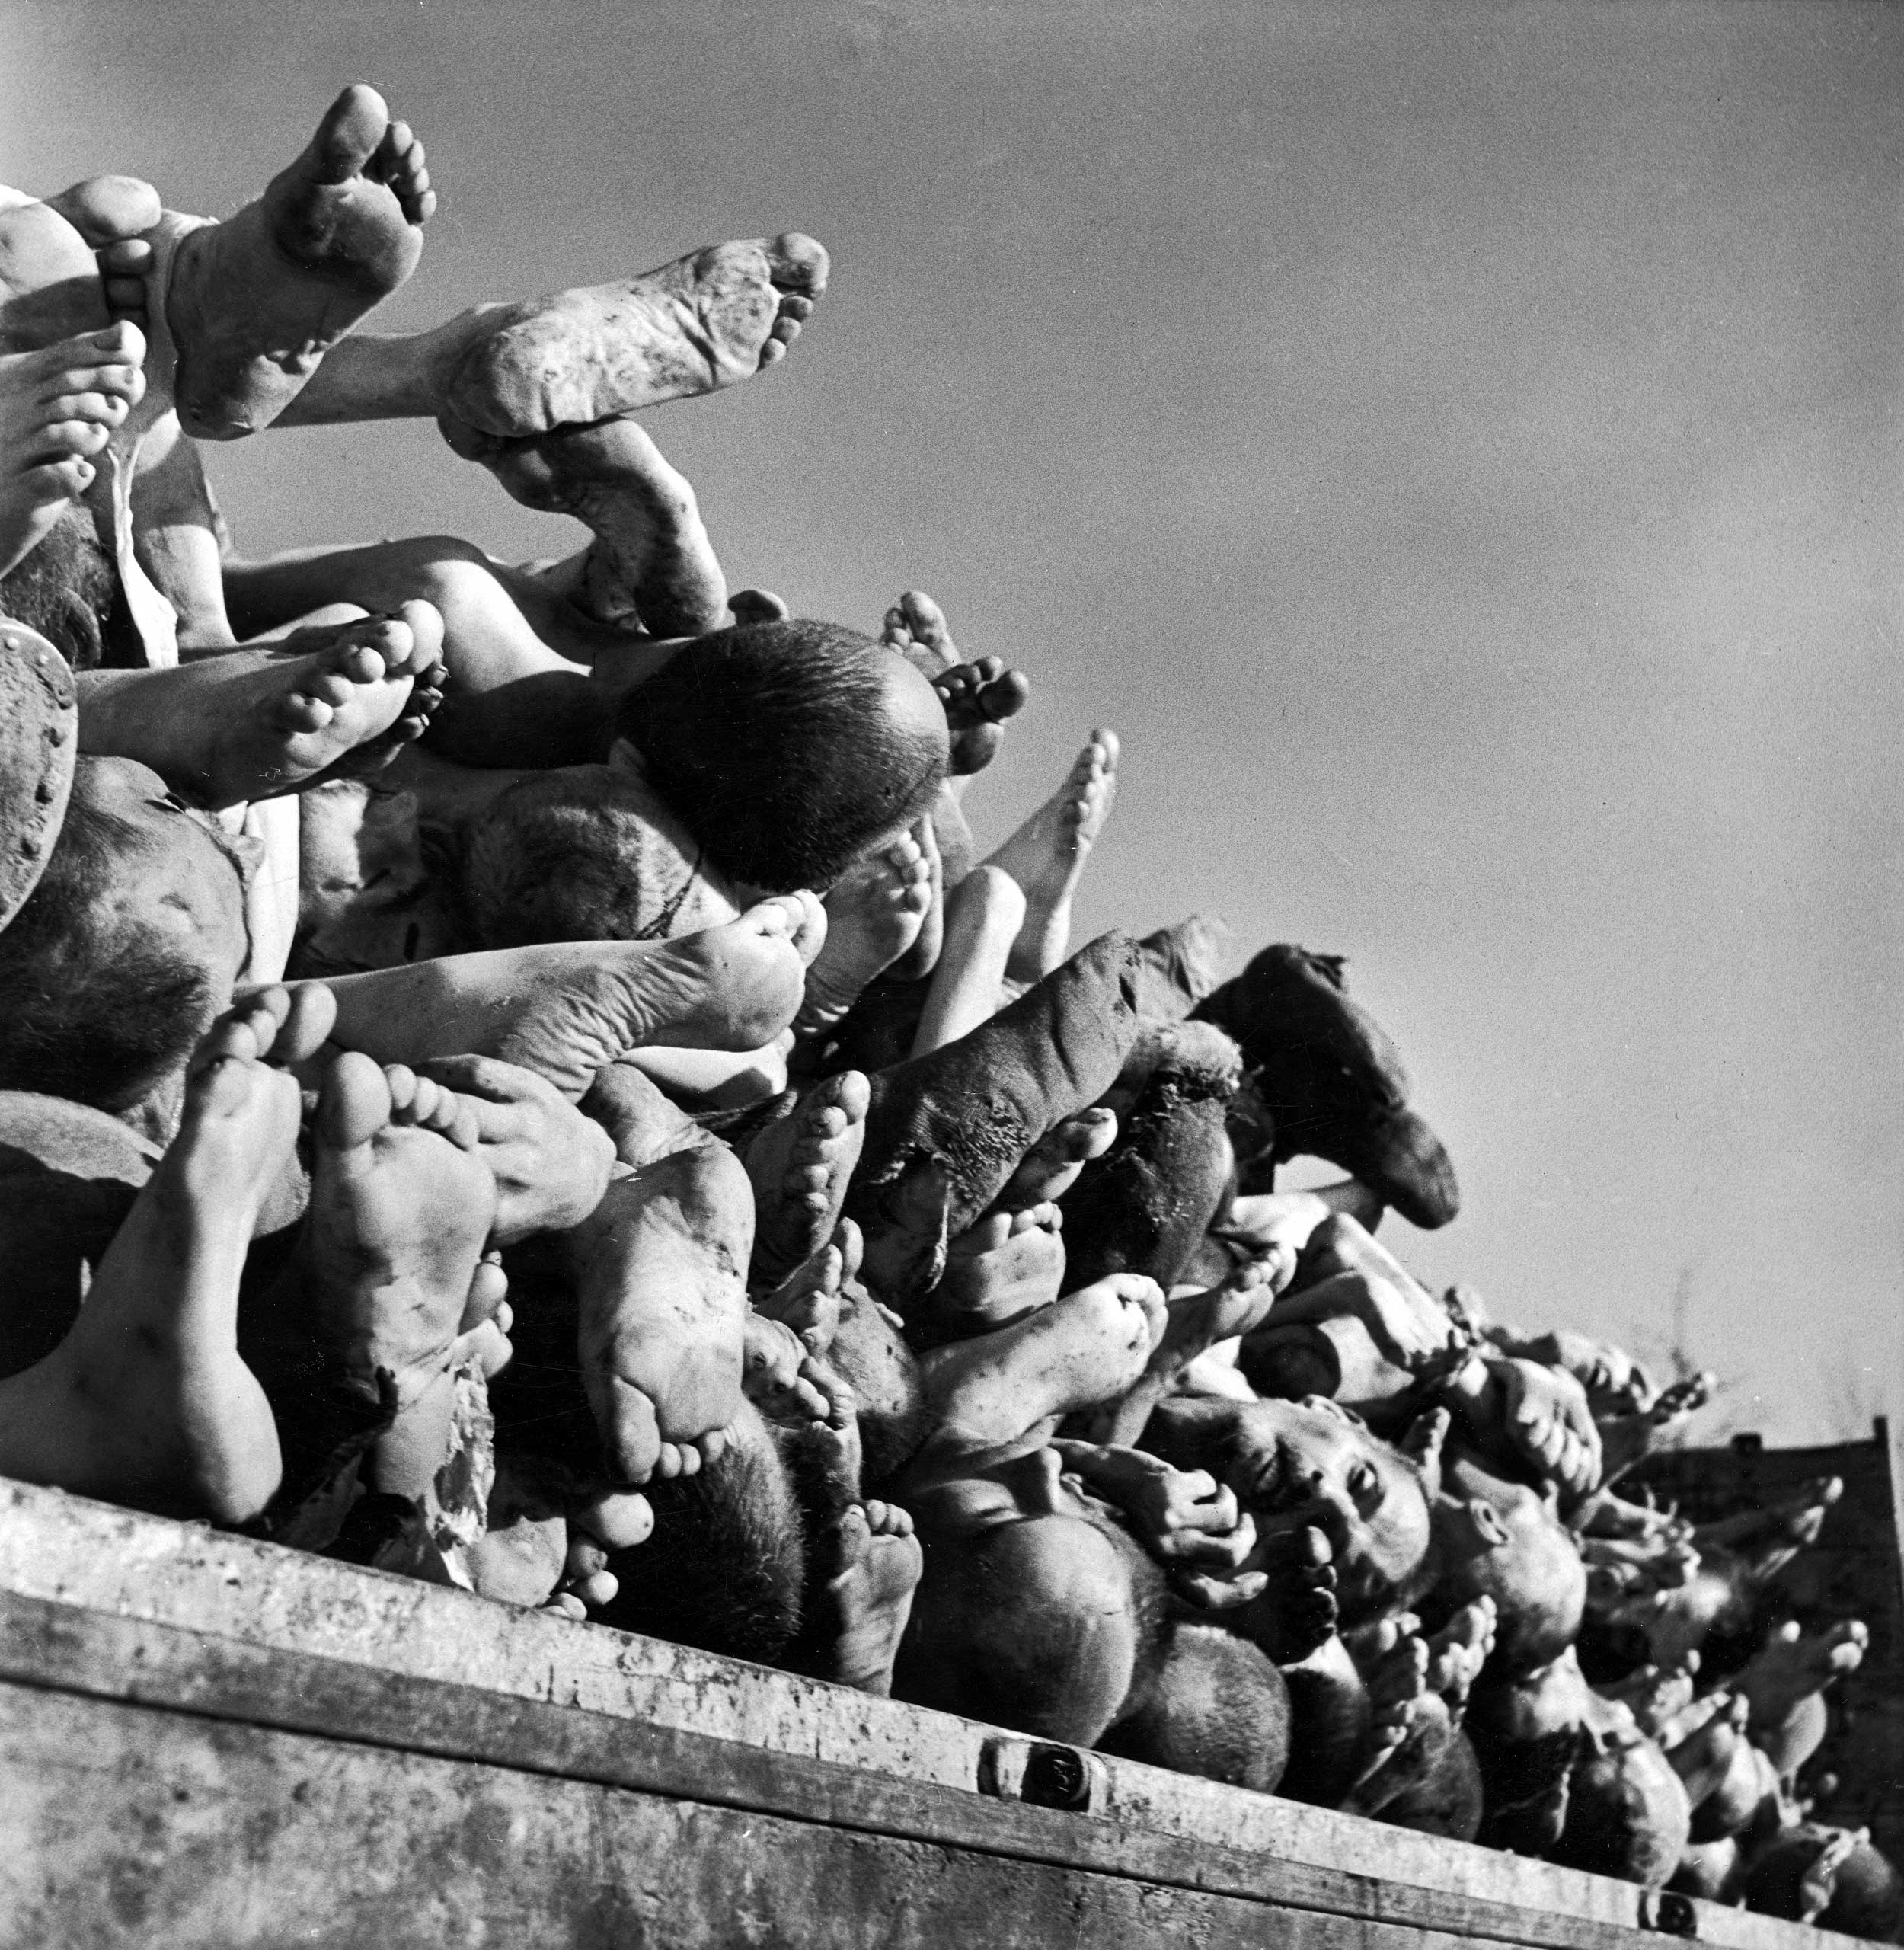 Not published in LIFE. The dead at Buchenwald, piled high outside the camp's incinerator plant, April 1945.